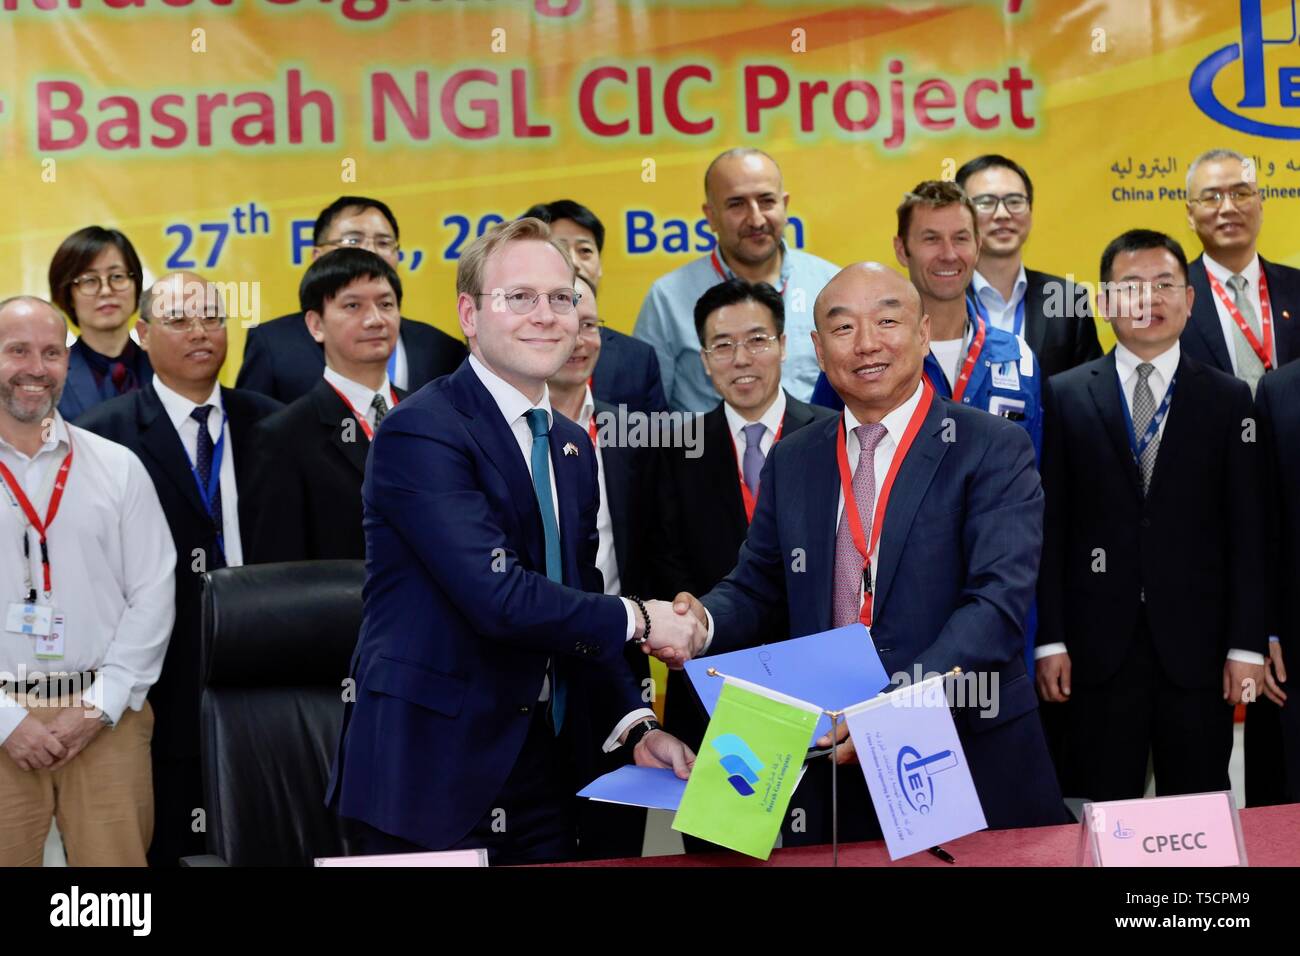 (190423) -- BASRA (IRAQ), April 23, 2019 (Xinhua) -- Photo taken on Feb. 27, 2019 shows officials from Basrah Gas Company and China Petroleum Engineering and Construction Corporation (CPECC) attending a ceremony to sign cooperation agreement in the southern province of Basra, Iraq. Through the Belt and Road Initiative, the Chinese company can offer financial, technical support and expertise for Iraqi government in reconstructing oil fields and increase their production, said Wang Xianghui, project director of Rumaila in China Petroleum Engineering and Construction Corporation (CPECC). (Xinhua/ Stock Photo